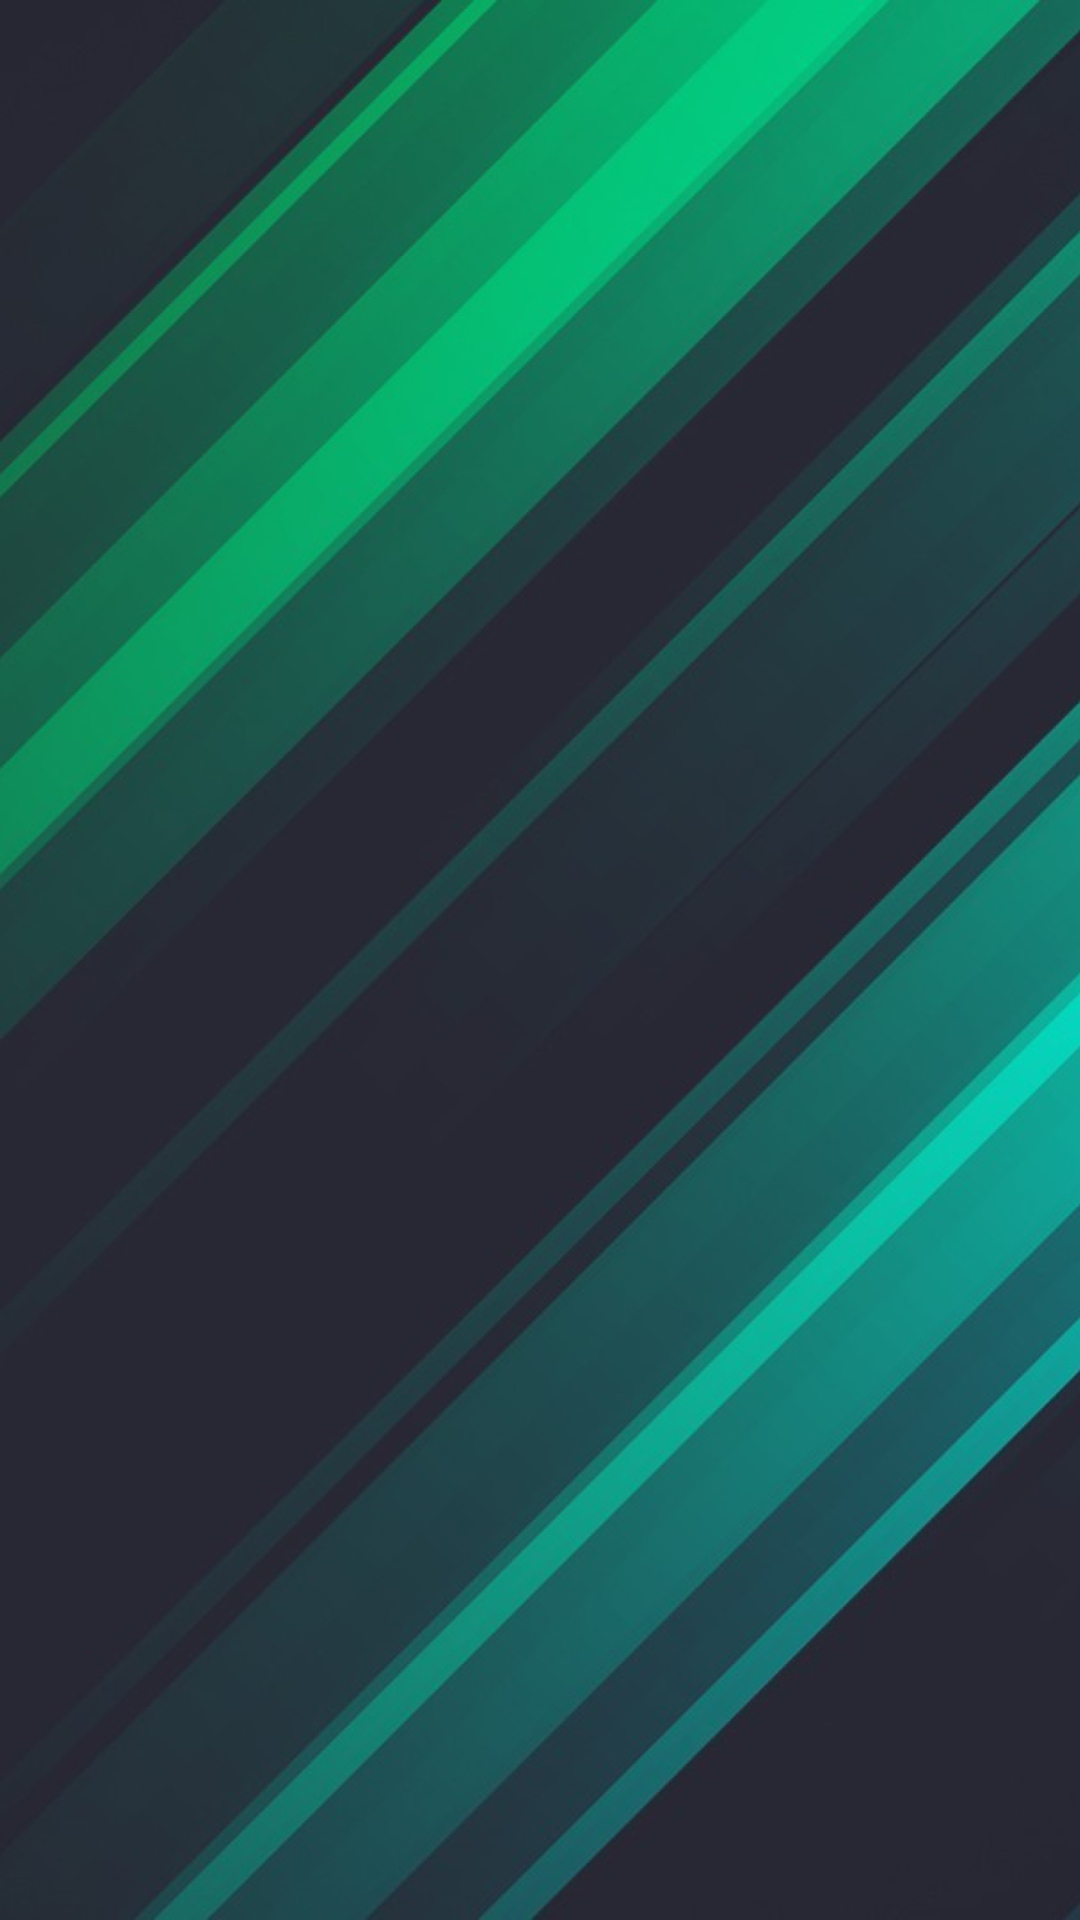 Green And Blue Stripes wallpaper 1080x1920